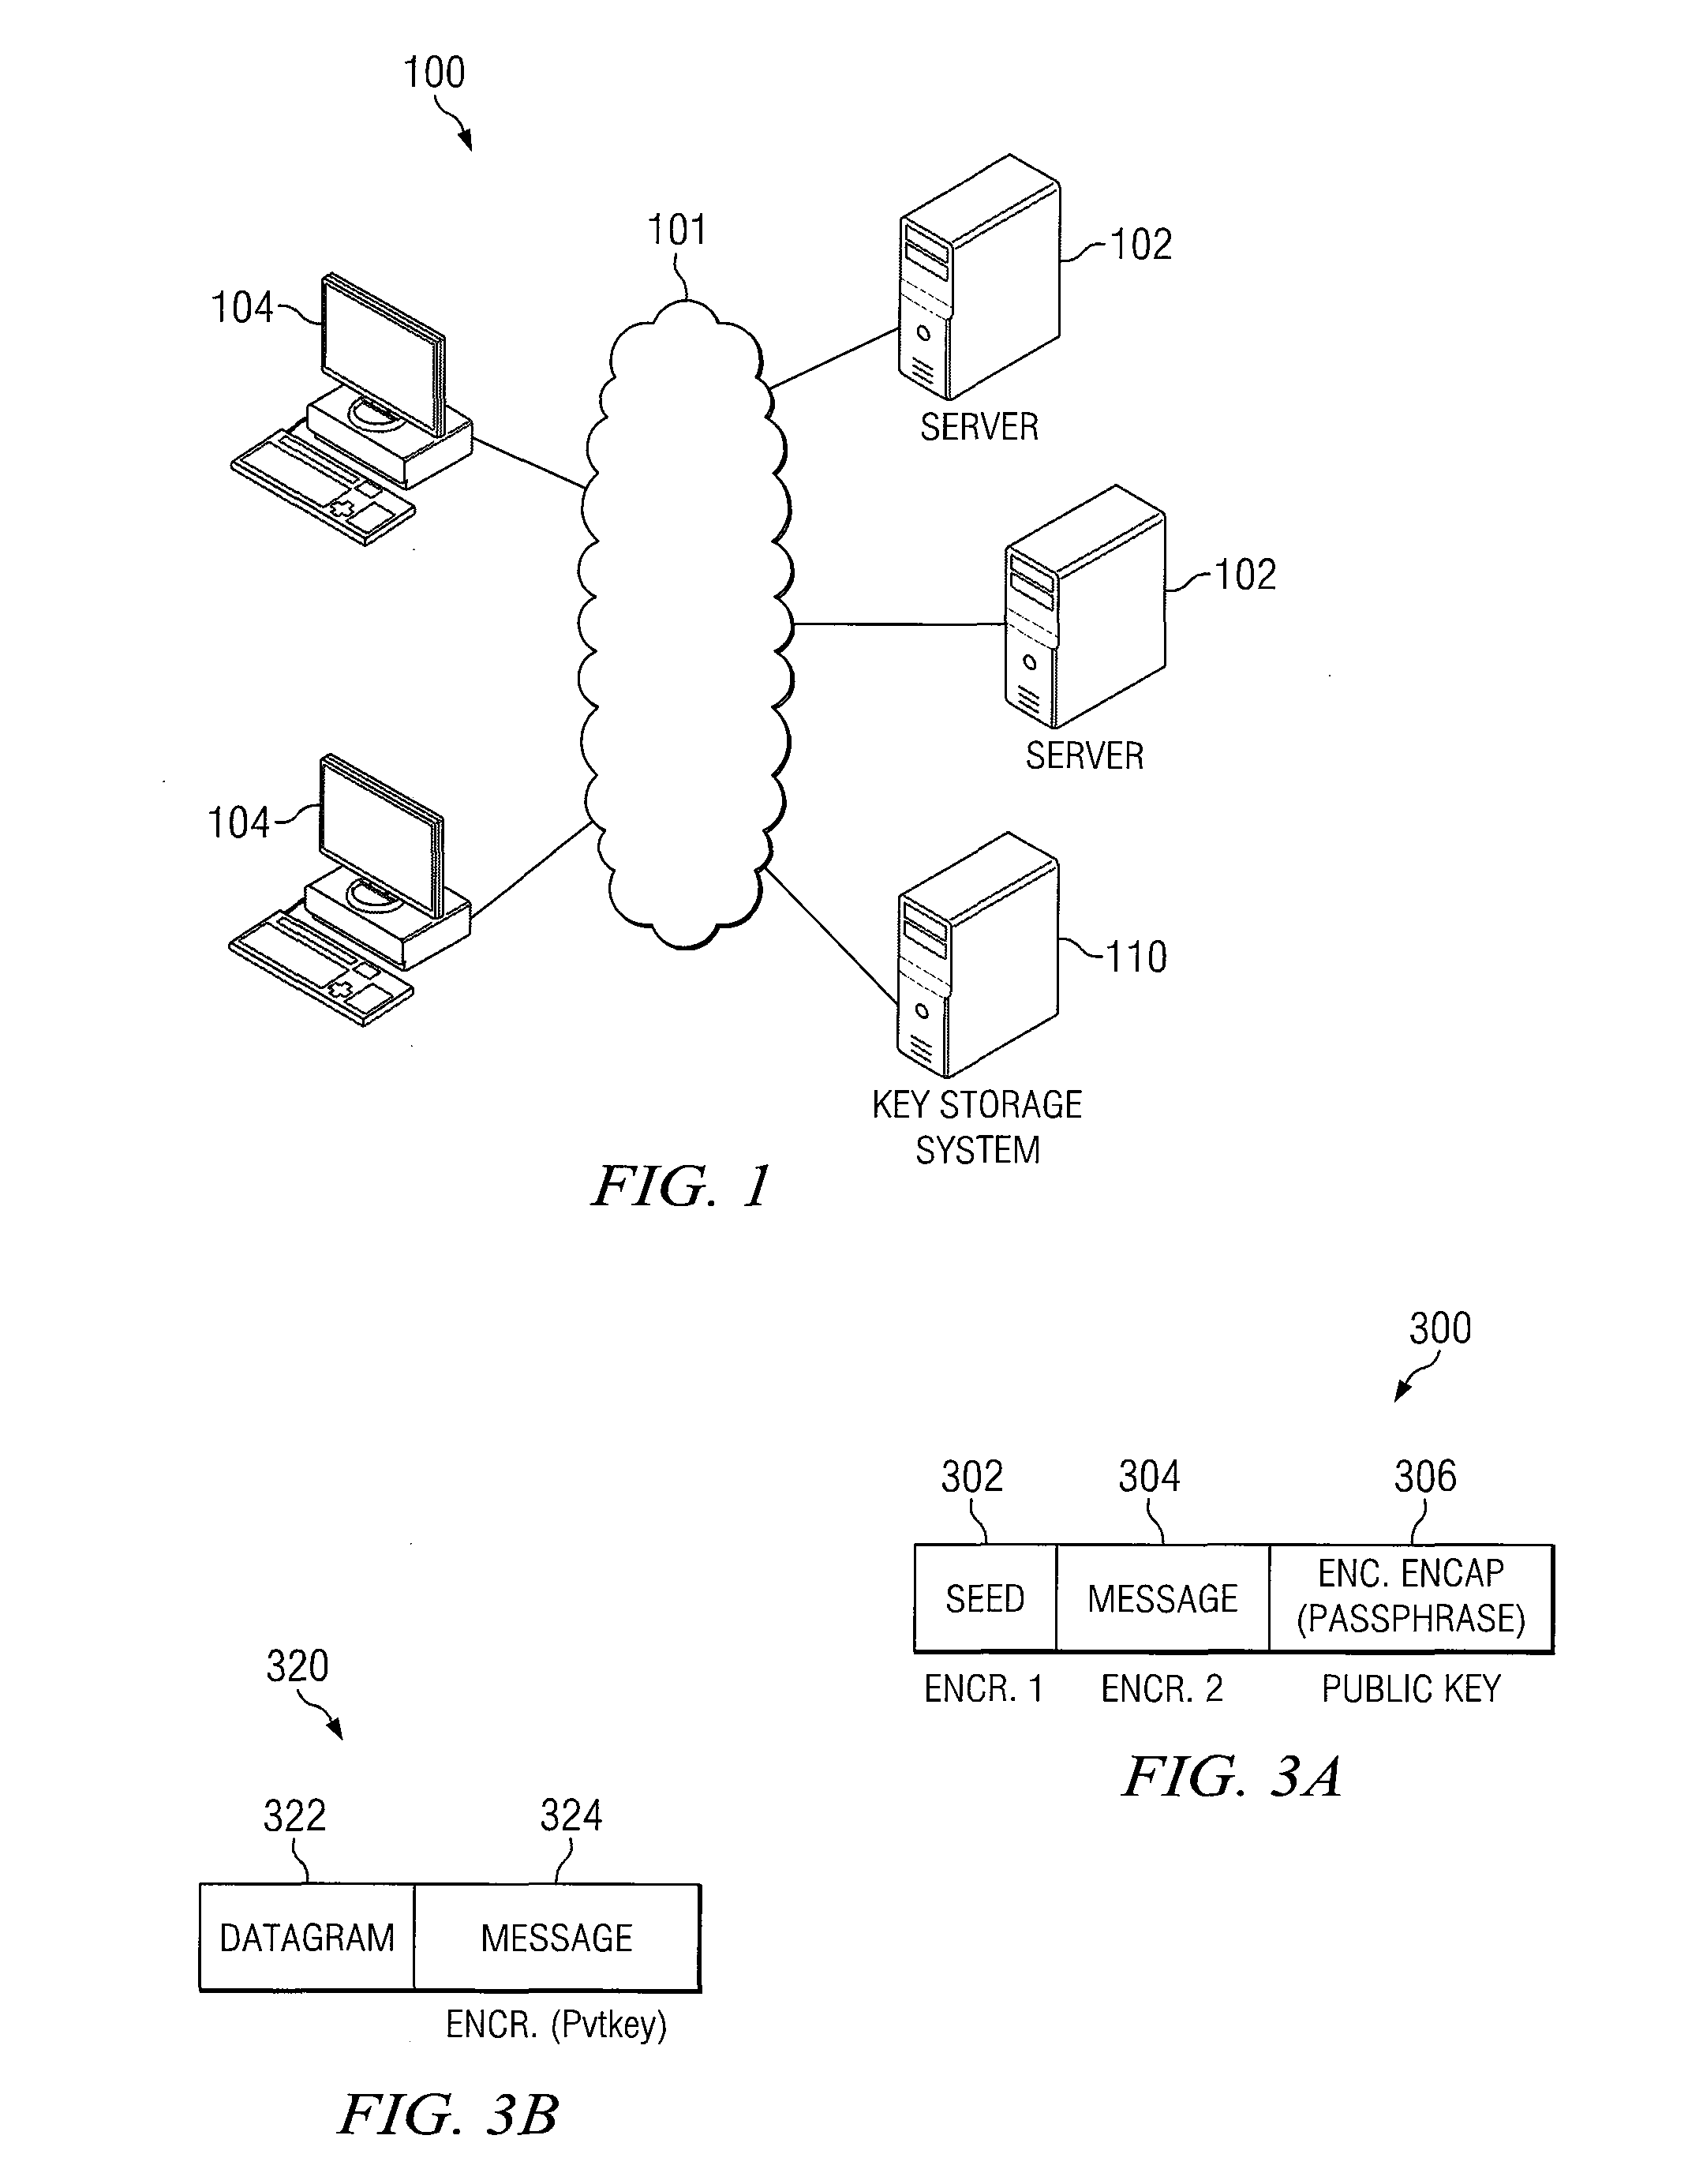 System and method for communicating with a key management system